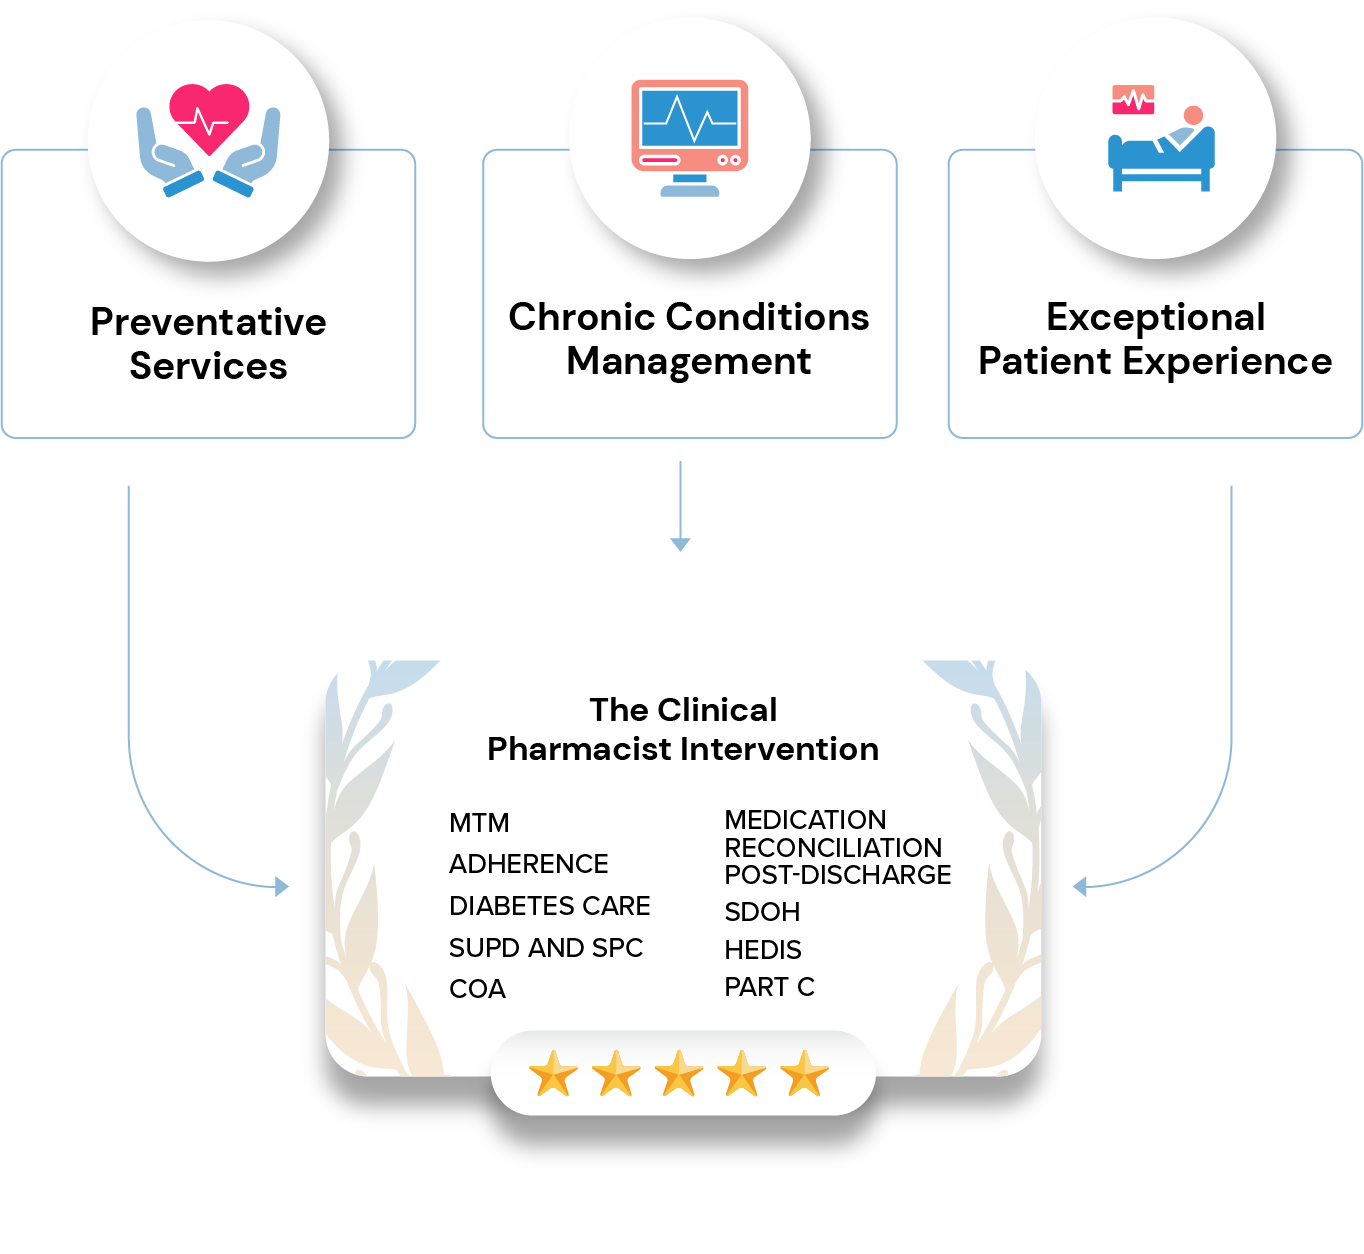 MedWatchers combines preventative services, chronic conditions management and exceptional patient experience to deliver a five-star clinical pharmacist intervention on behalf of our clients.